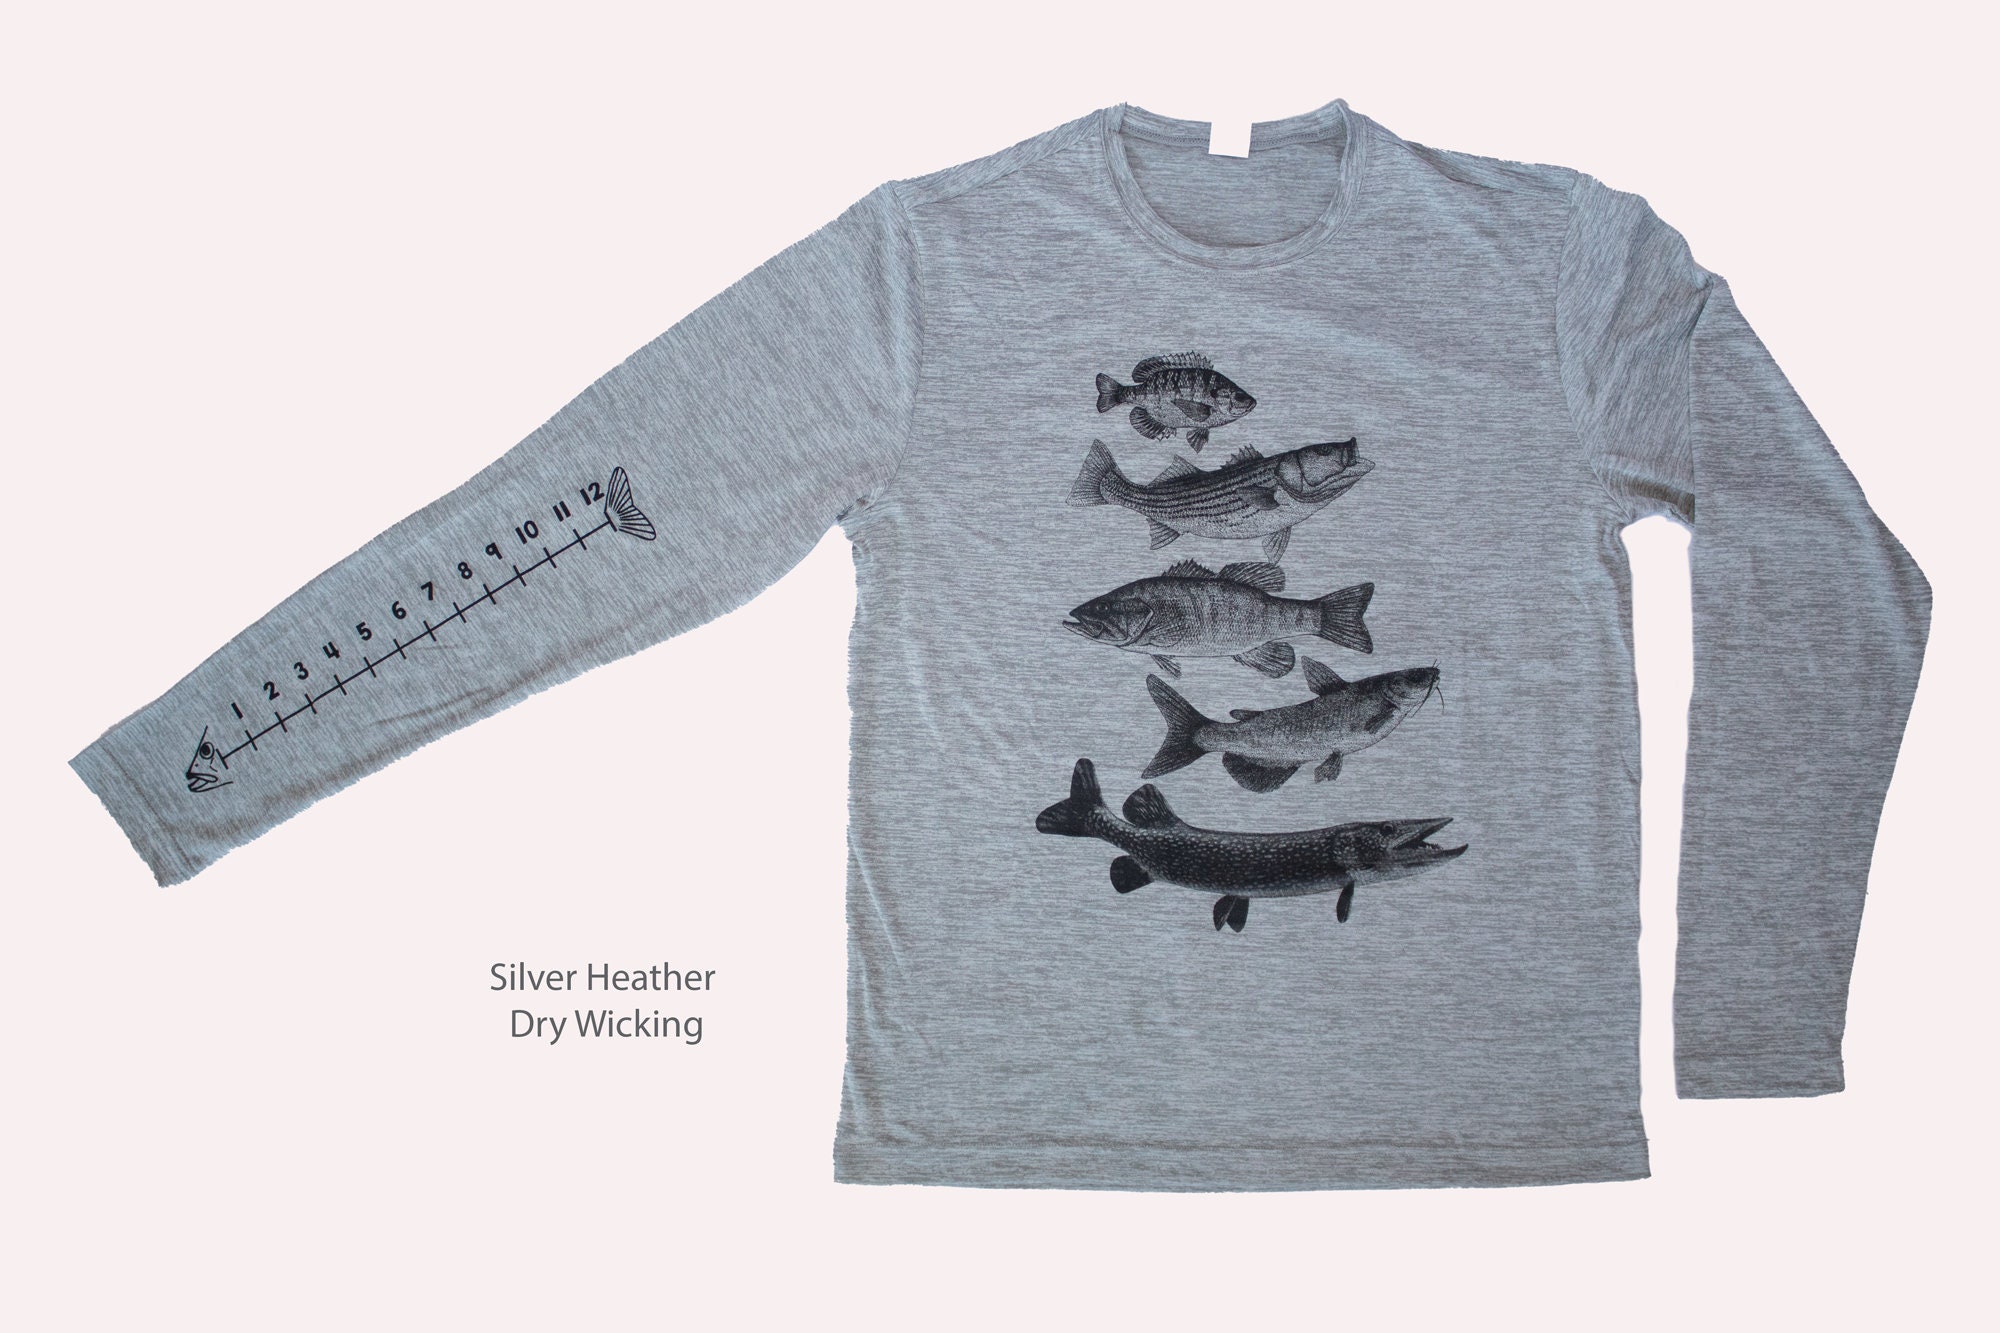 Dry Wicking Fishing Shirt With Ruler to Measure Fish-unisex